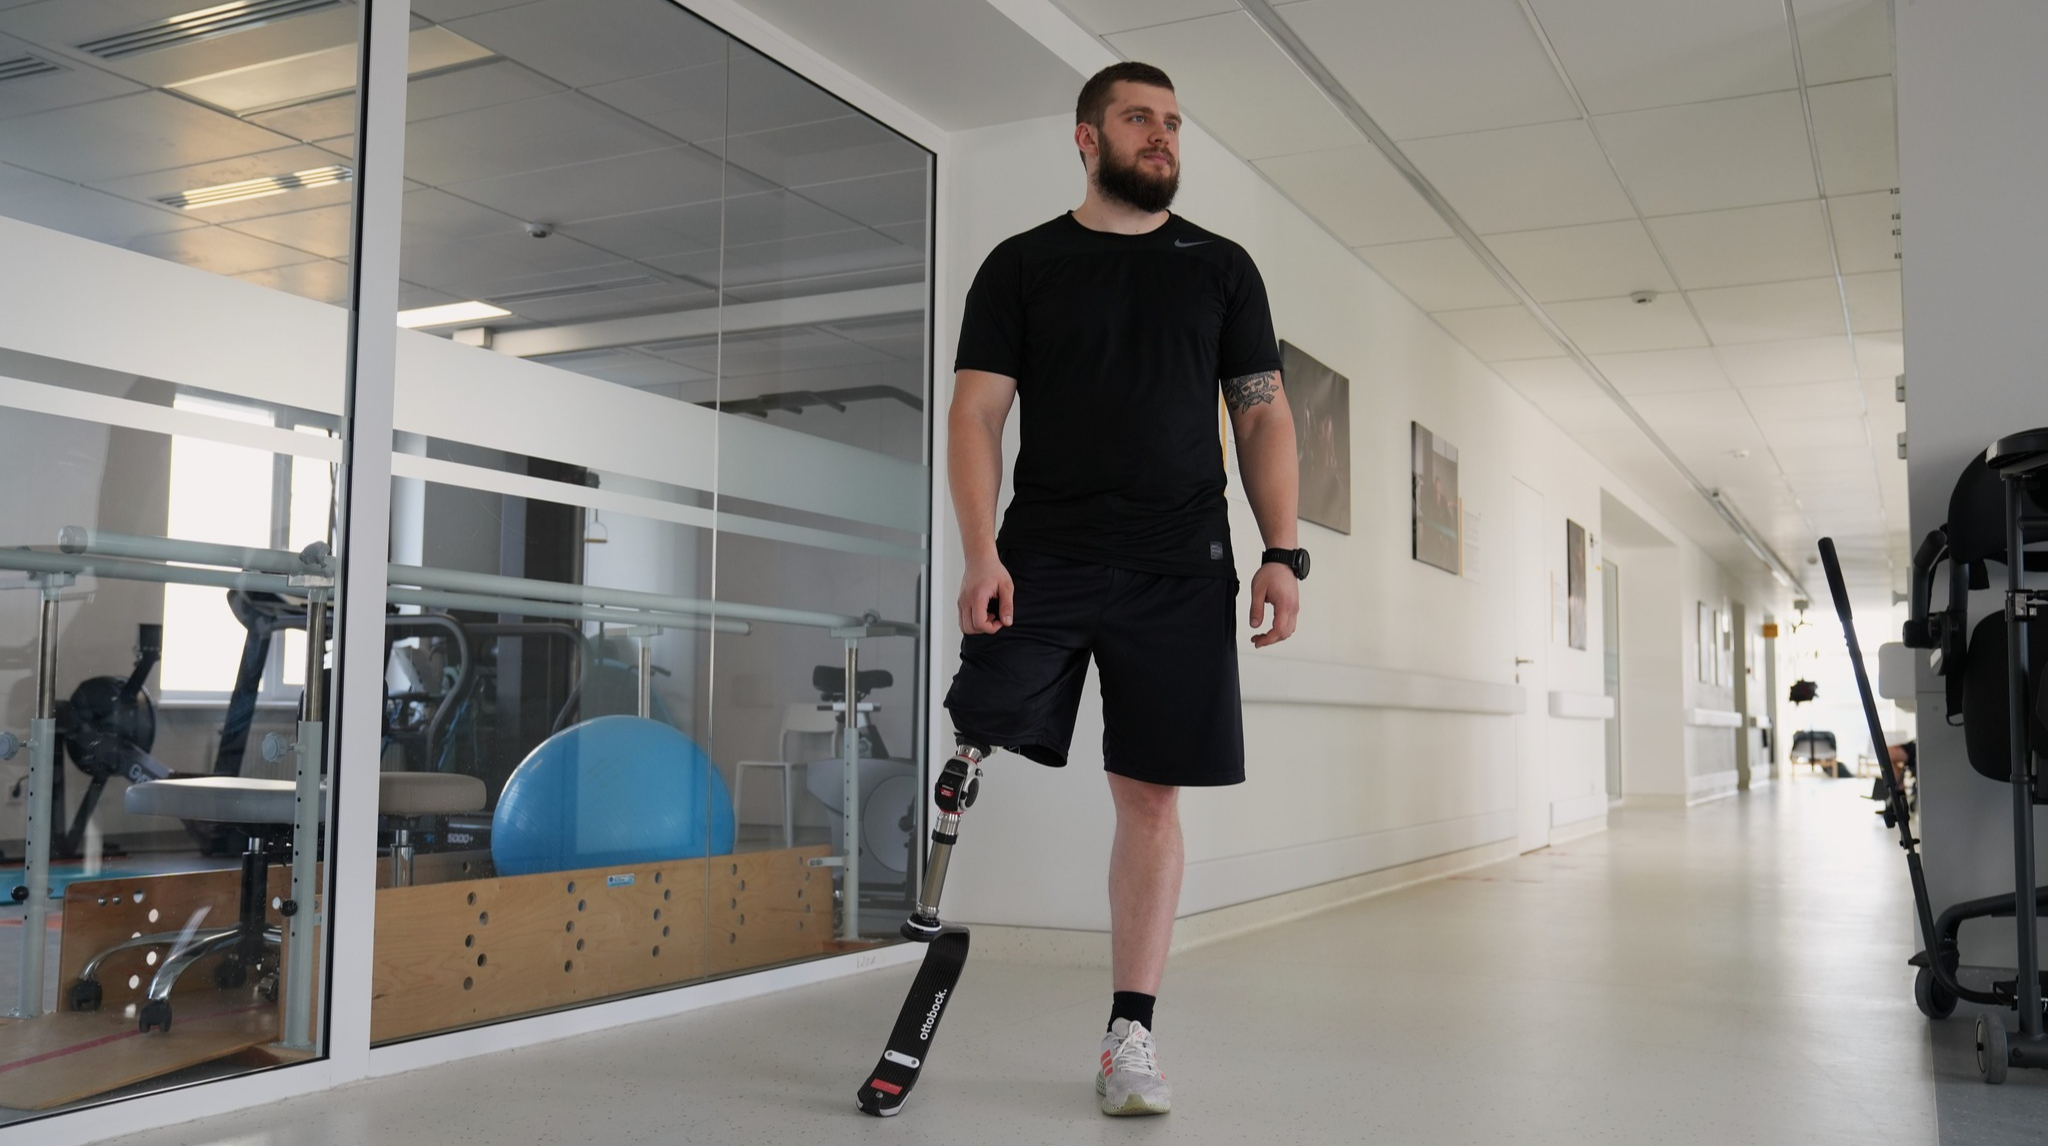 The story of a soldier who started running again thanks to prosthetics